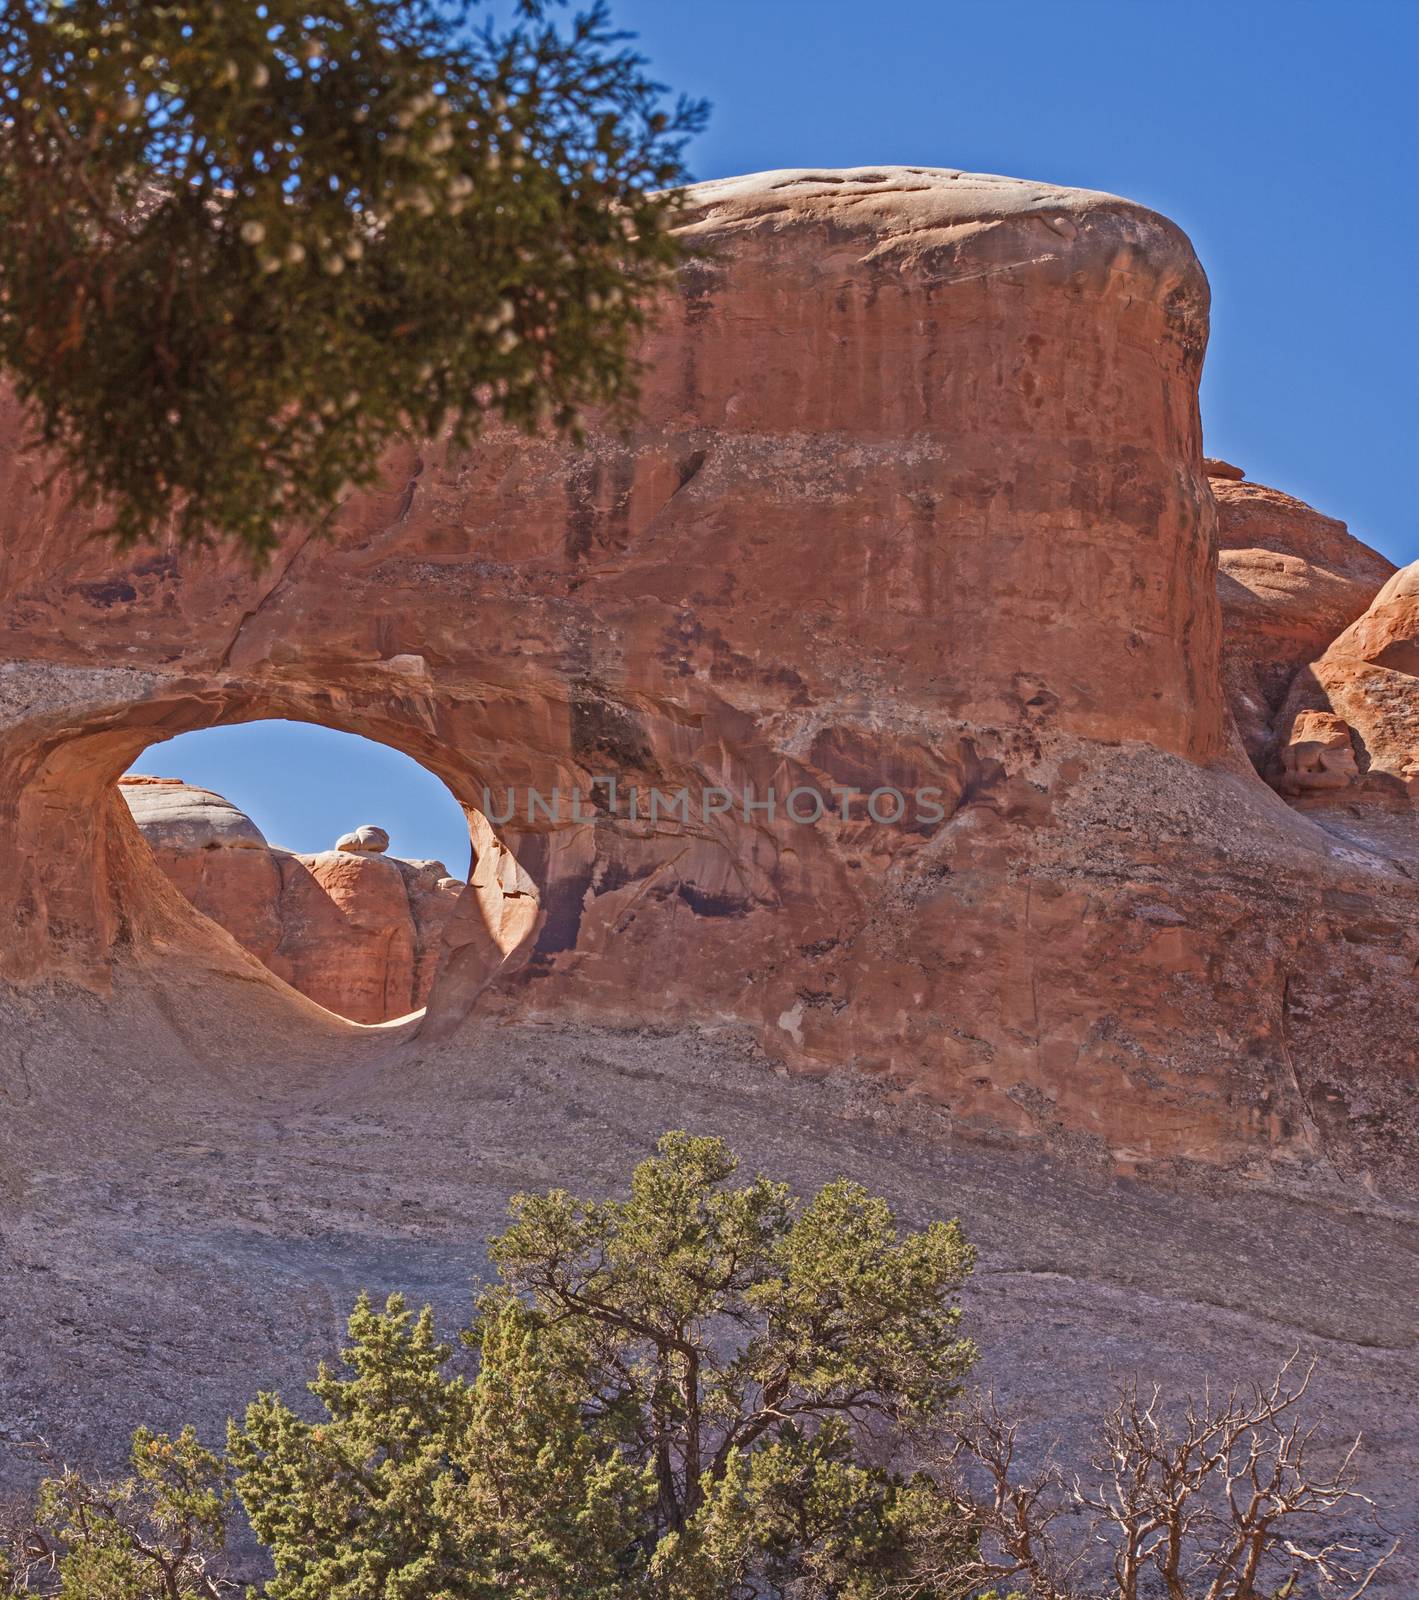 The Tunnel Arch in Arches National Park, Utah. USA